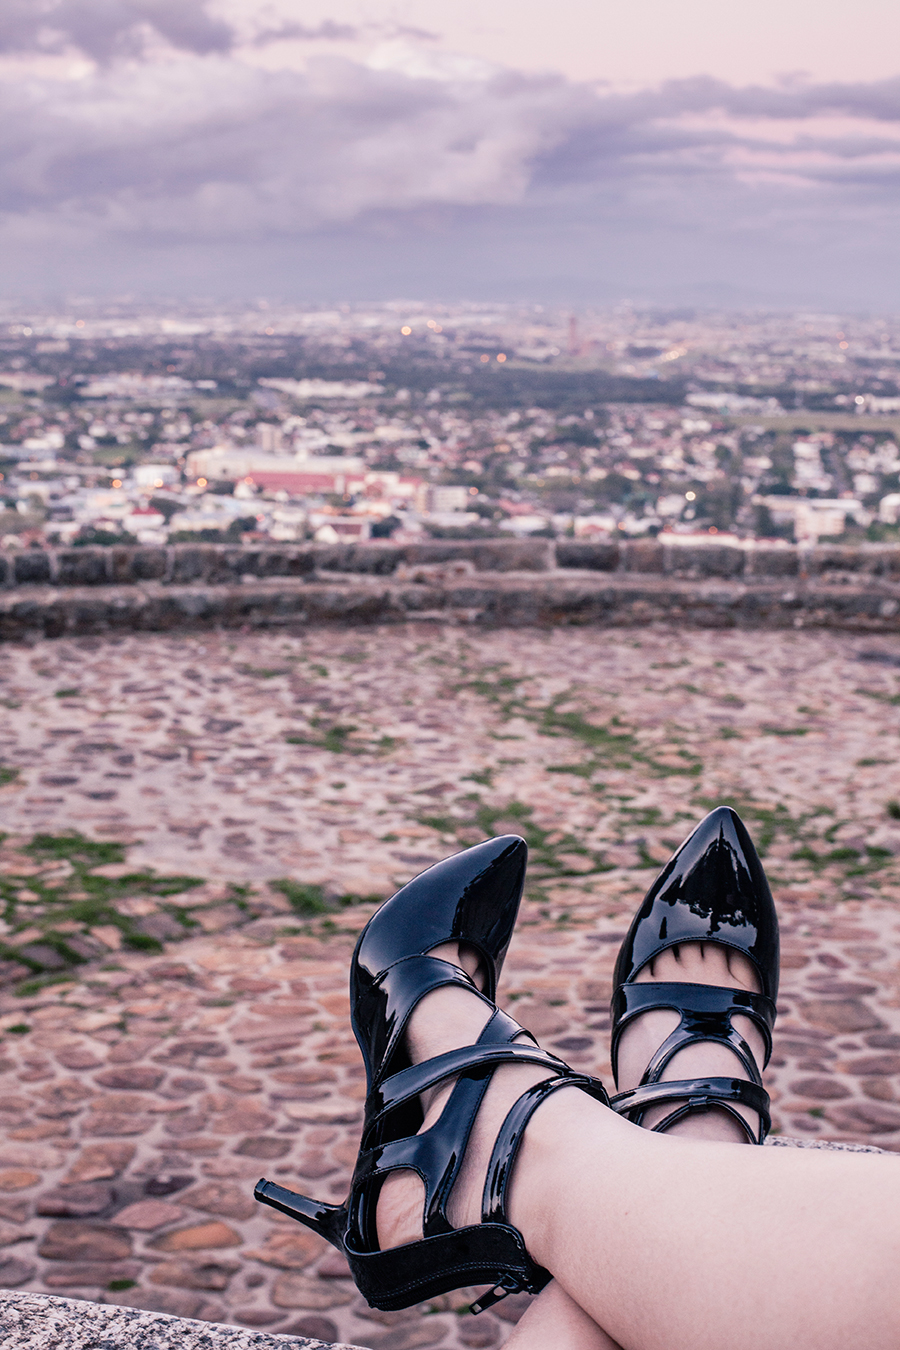 From where I sit featuring Sidewalk strappy heels overlooking Cape Town.